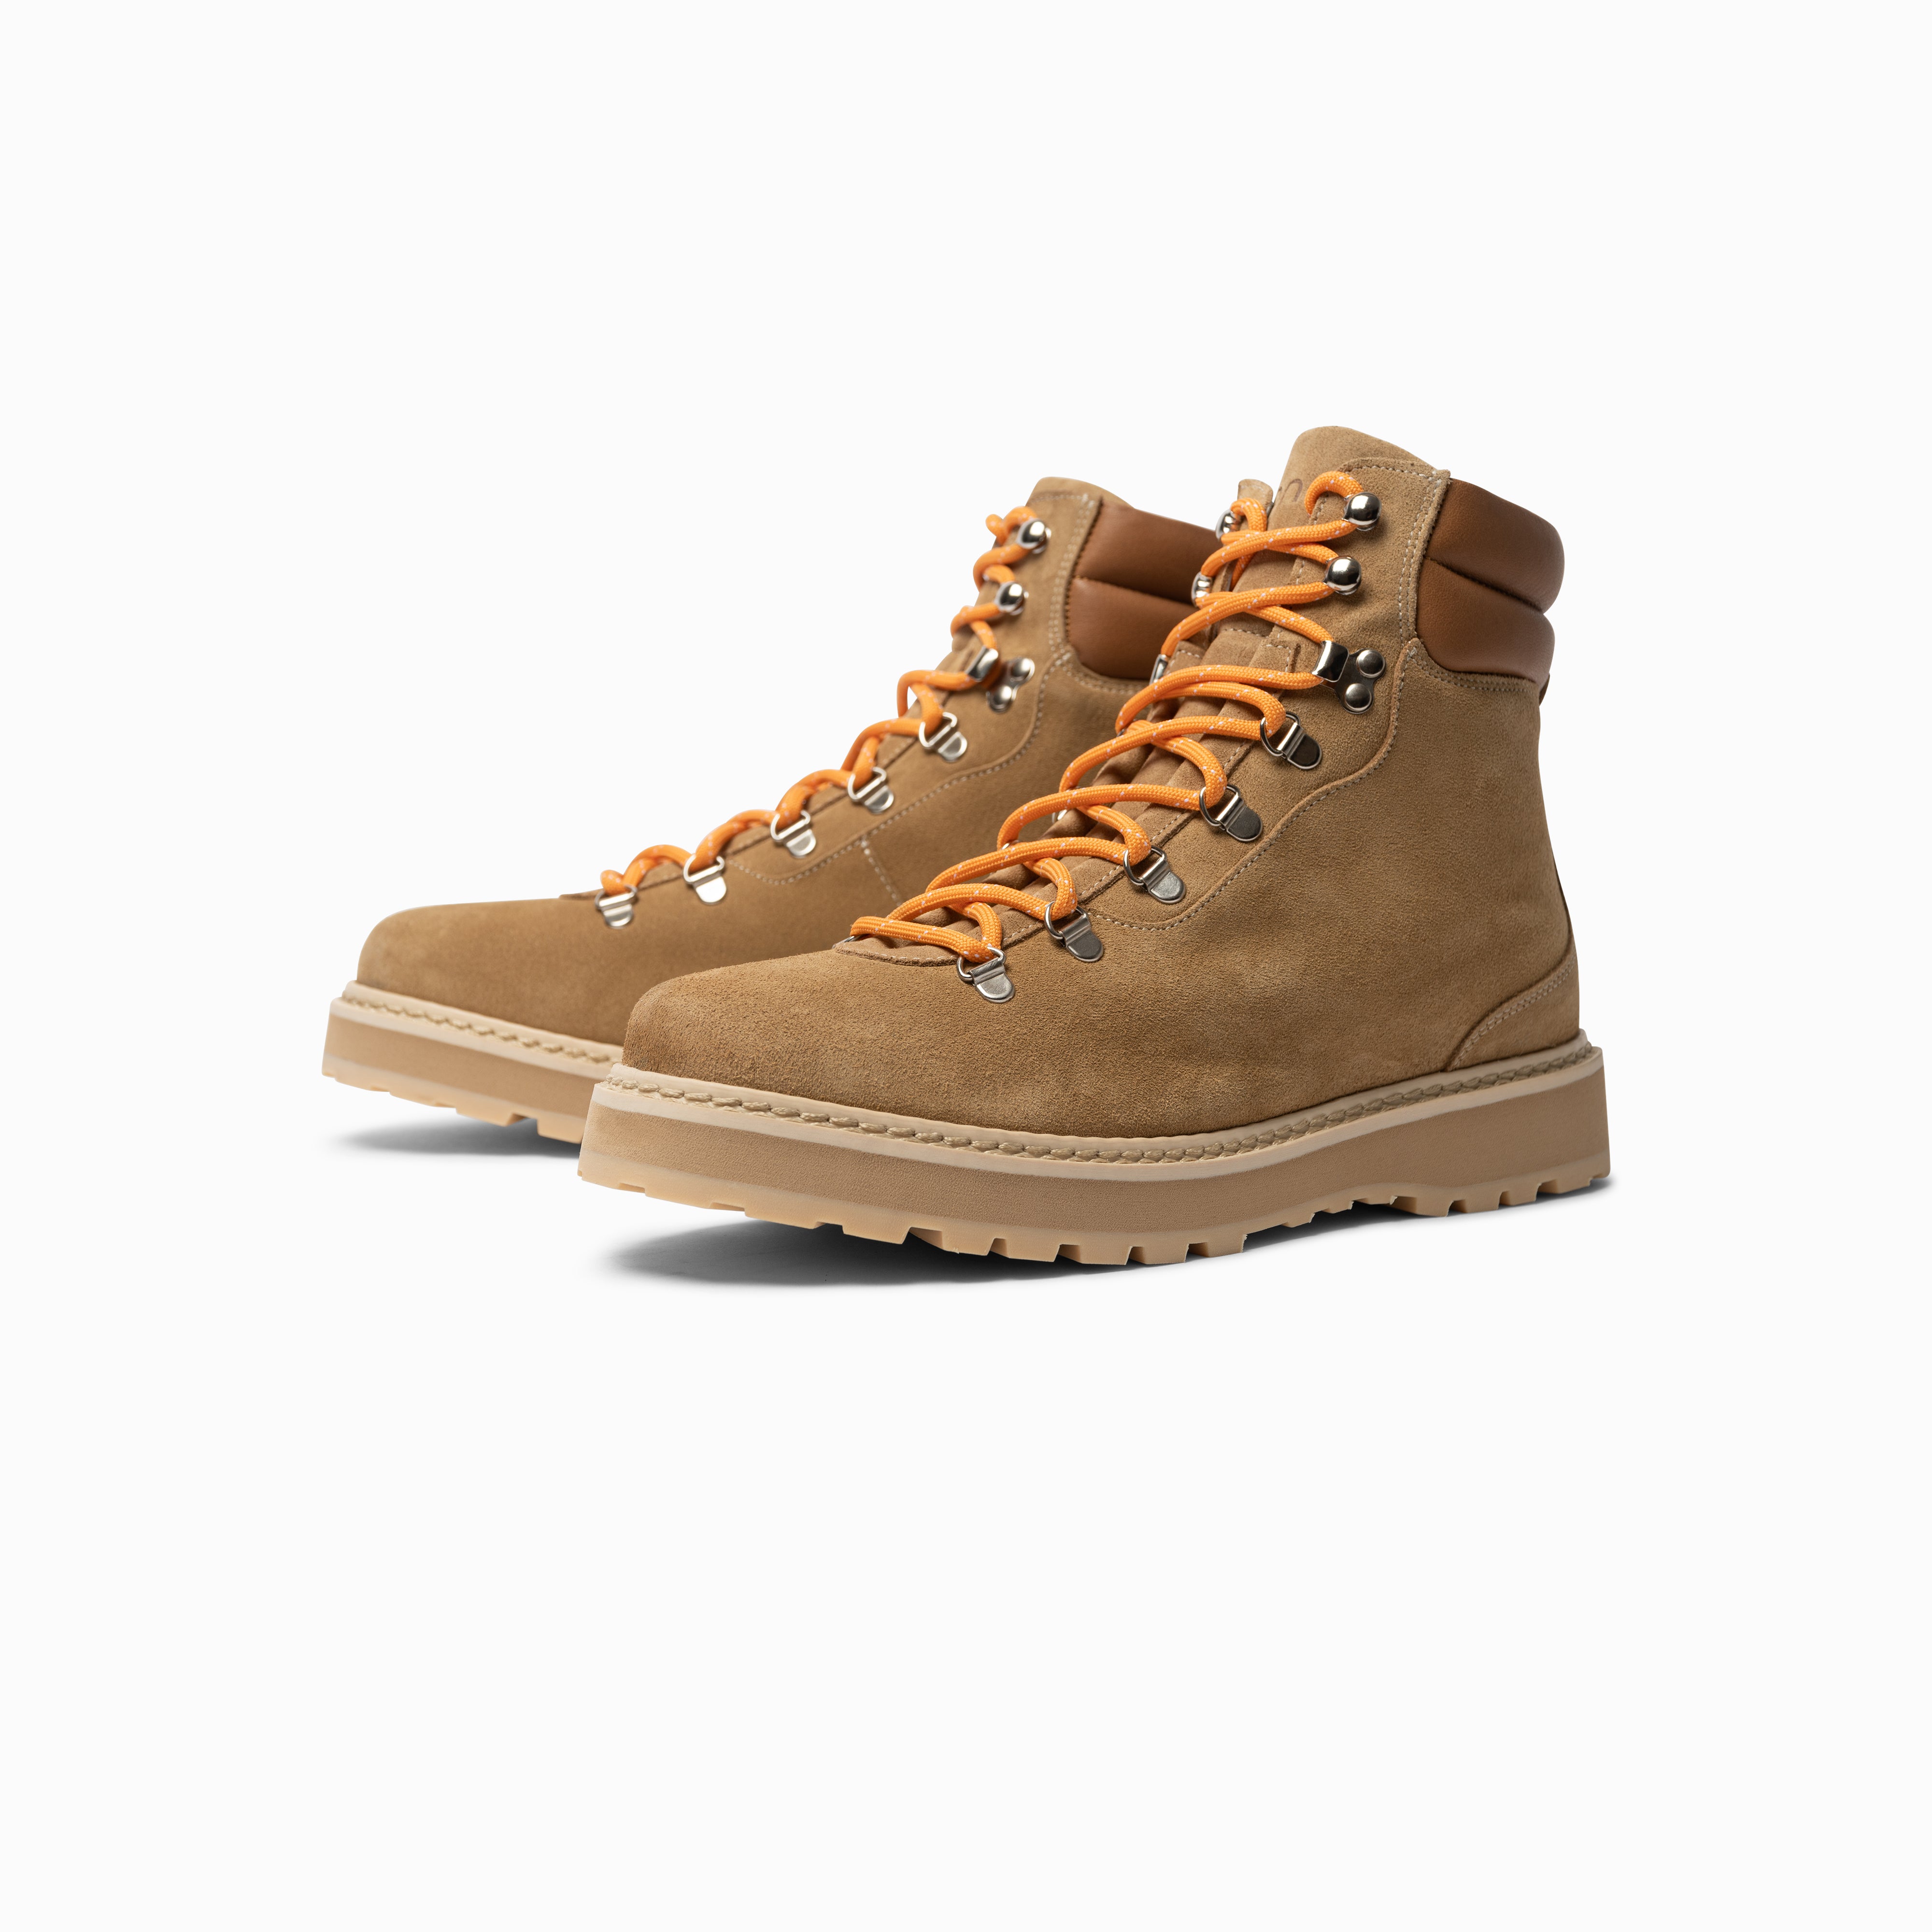 Hiking - Suede - Shearling Lining - Mens